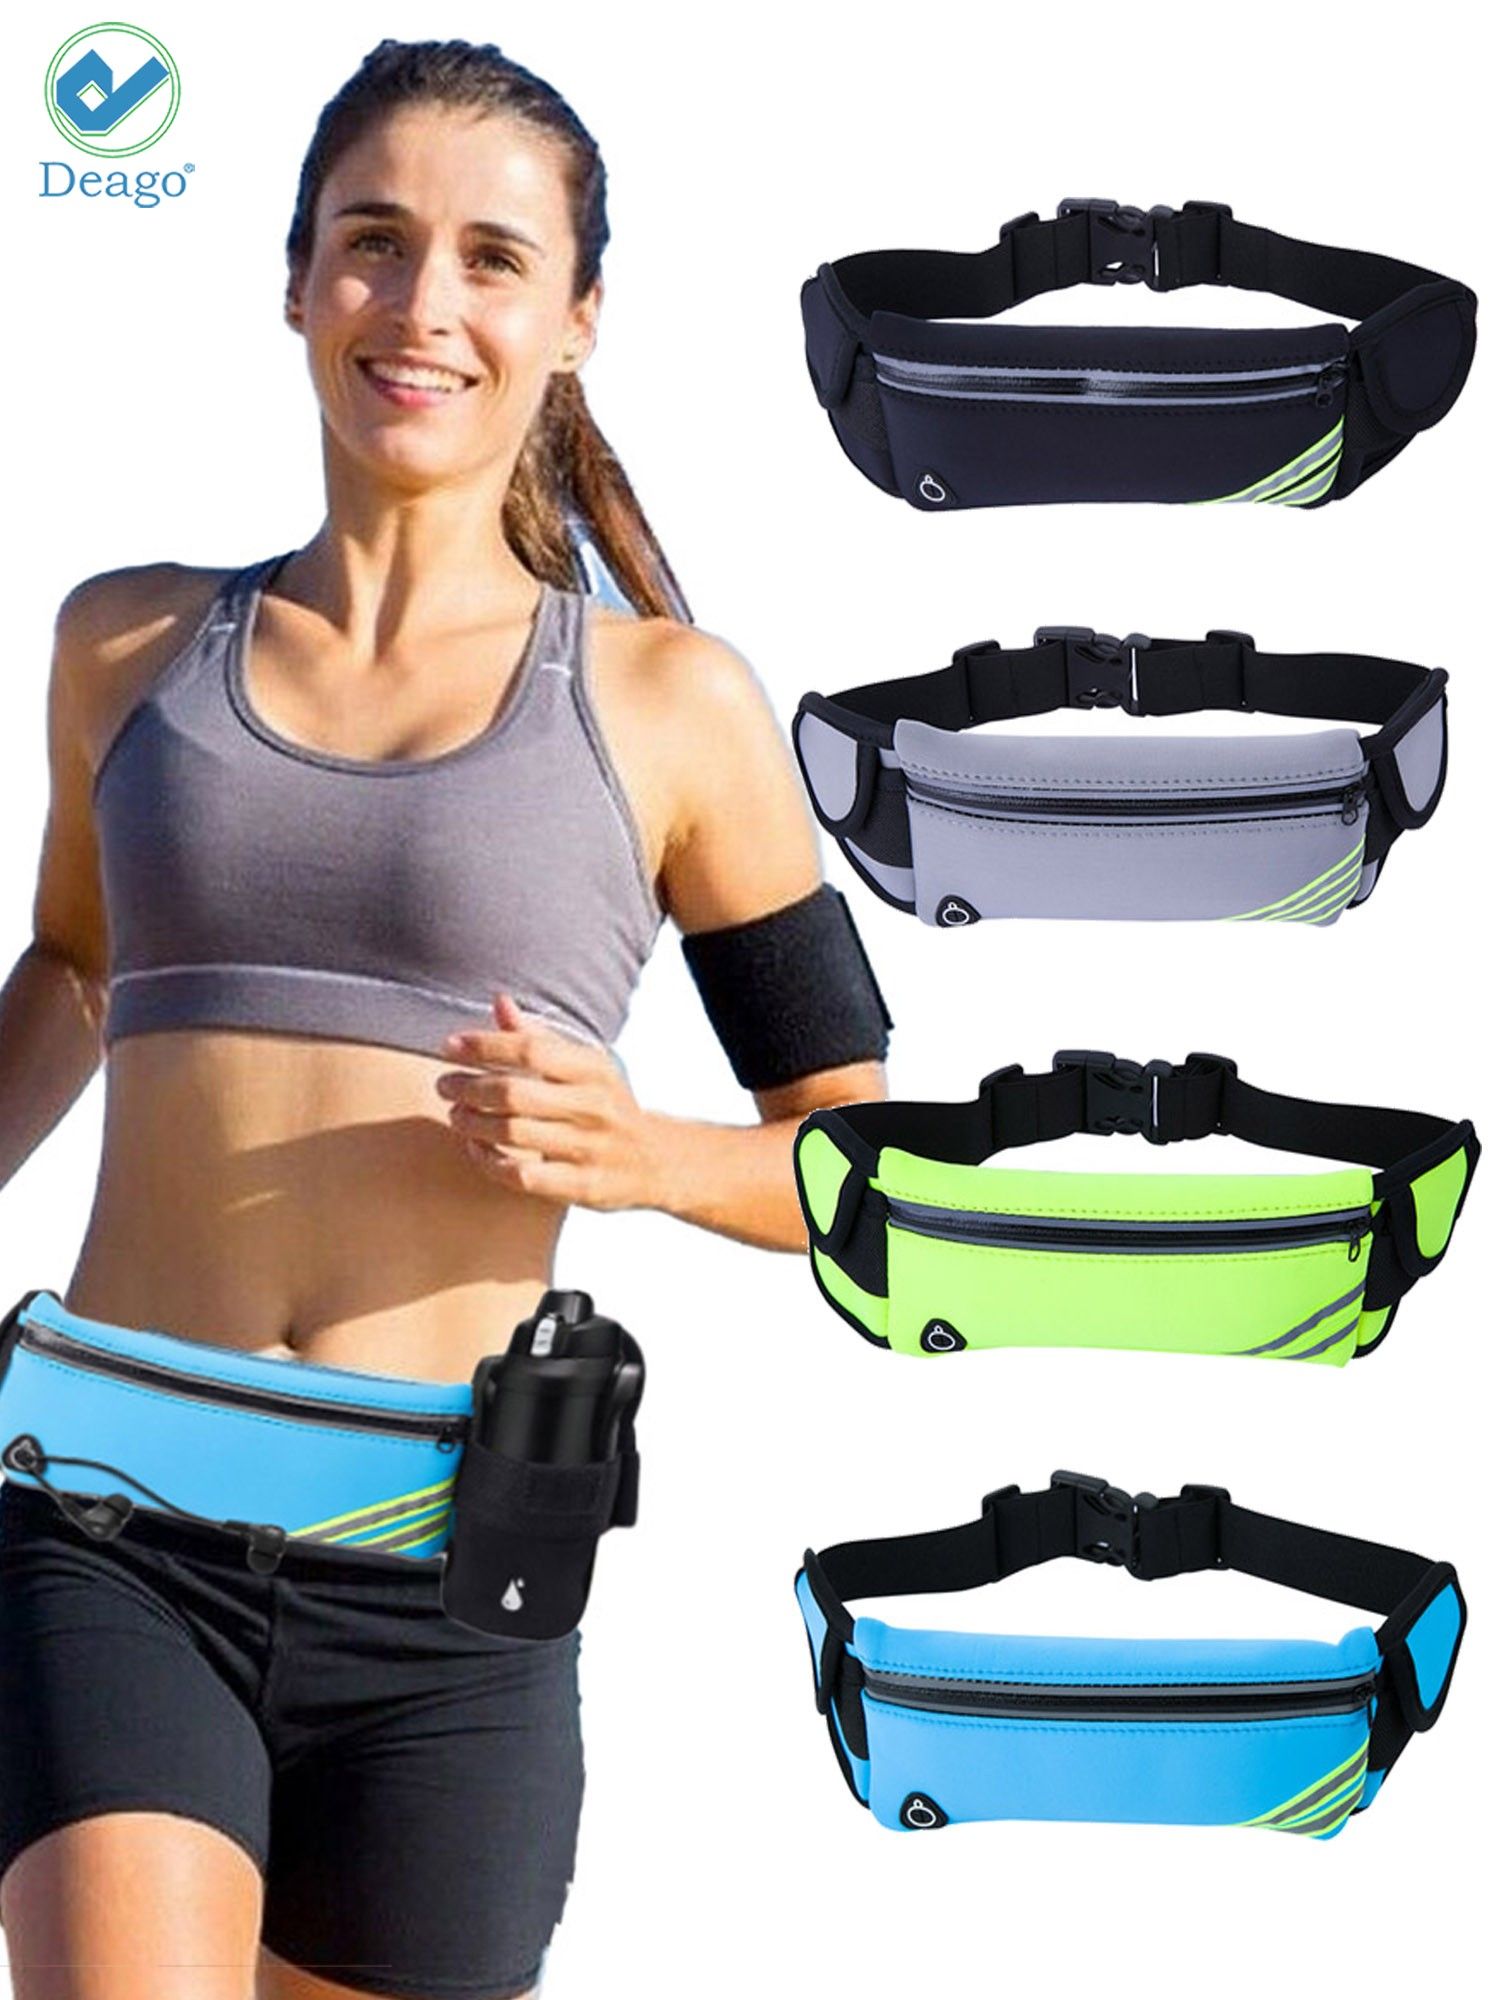 Deago No-Bounce Reflective Running Belt Pouch Fanny Pack,Unisex Water Resistant Workout Waist Pack Bag for Fitness Jogging Hiking Travel,Cell Phone Holder Fits iPhone 11 X 8 7 6 - image 2 of 8